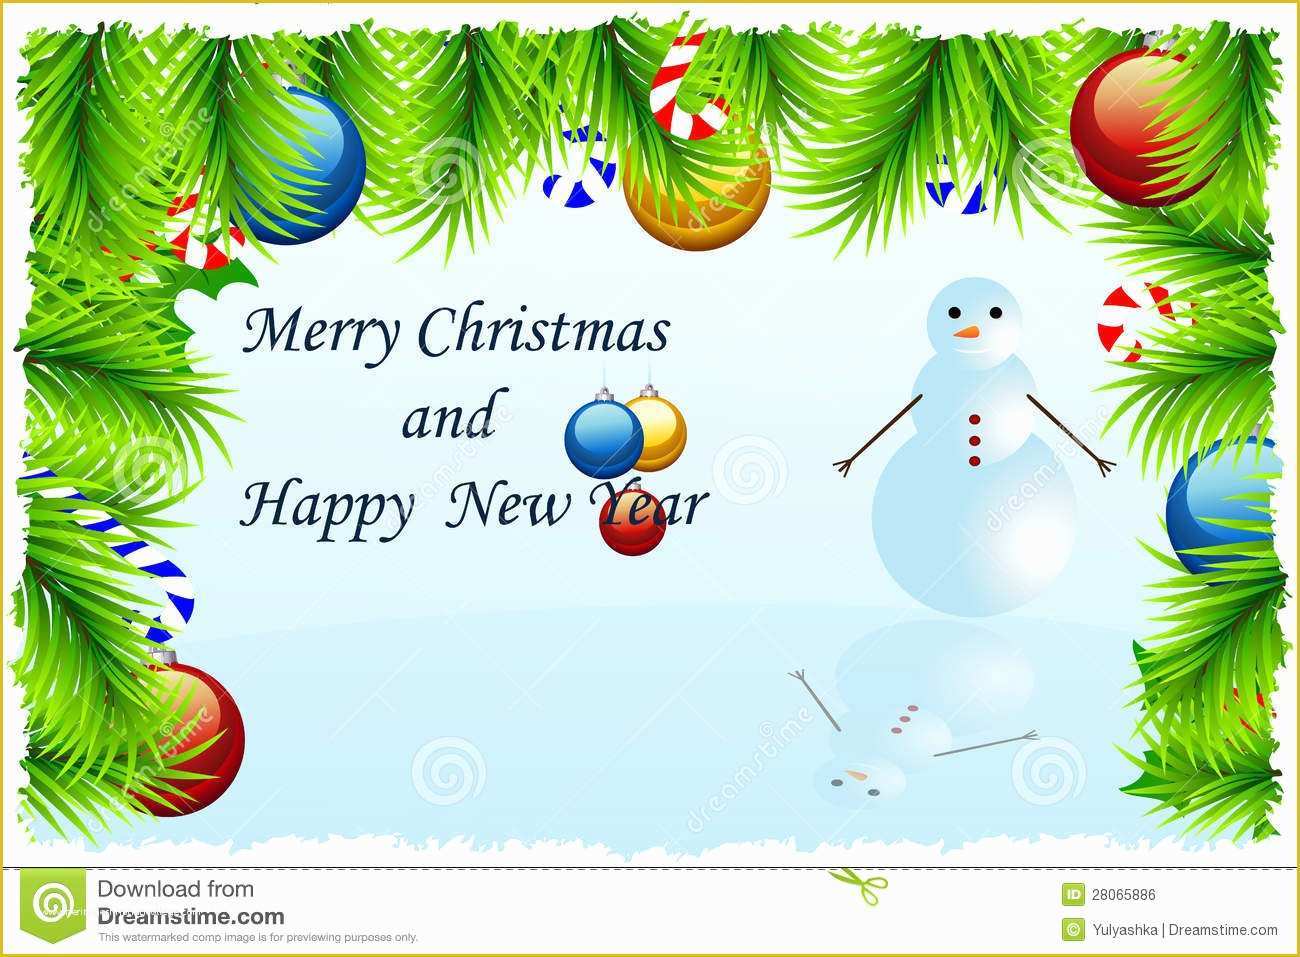 Free Christmas Greeting Card Templates Of 16 Holiday Greeting Card Template Free Christmas